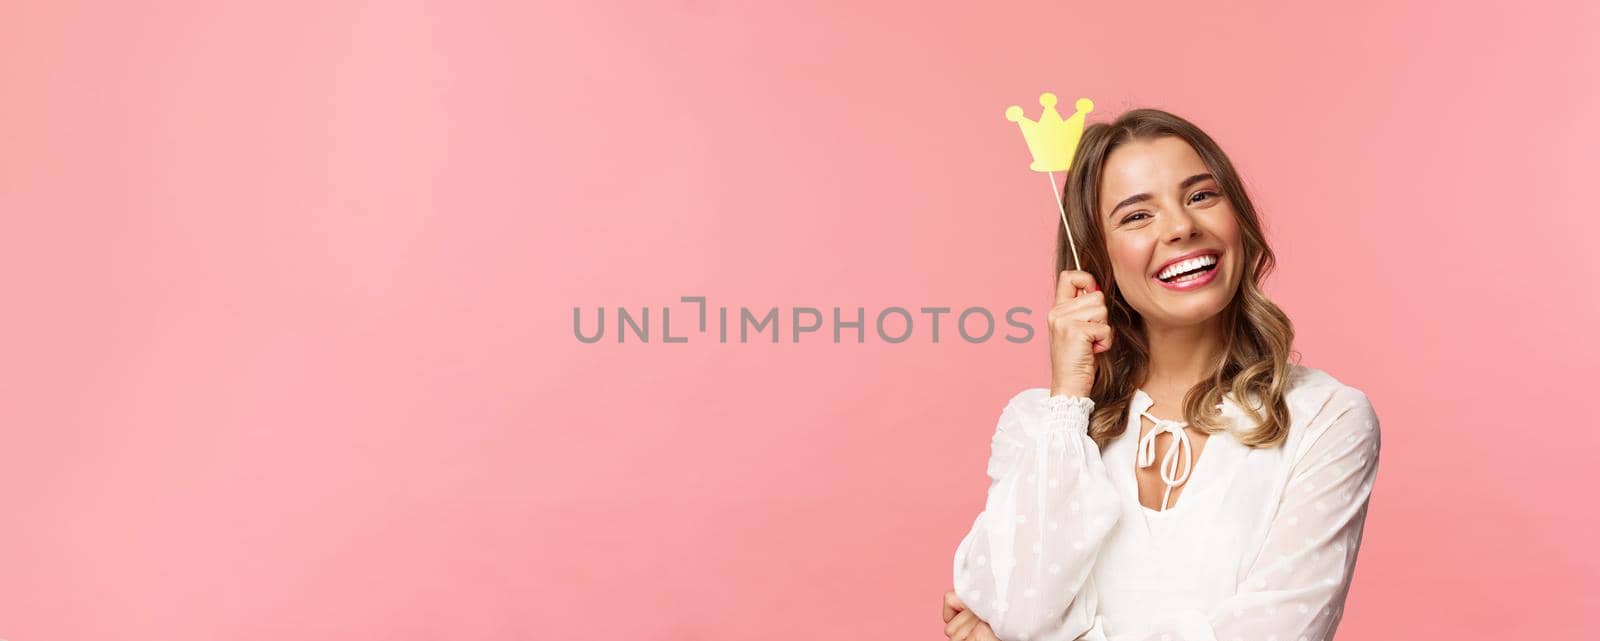 Spring, happiness and celebration concept. Close-up portrait of charming smiling, lovely blond girl holding small queen crown on stick, laughing joyfully, feel empowered and happy, pink background.